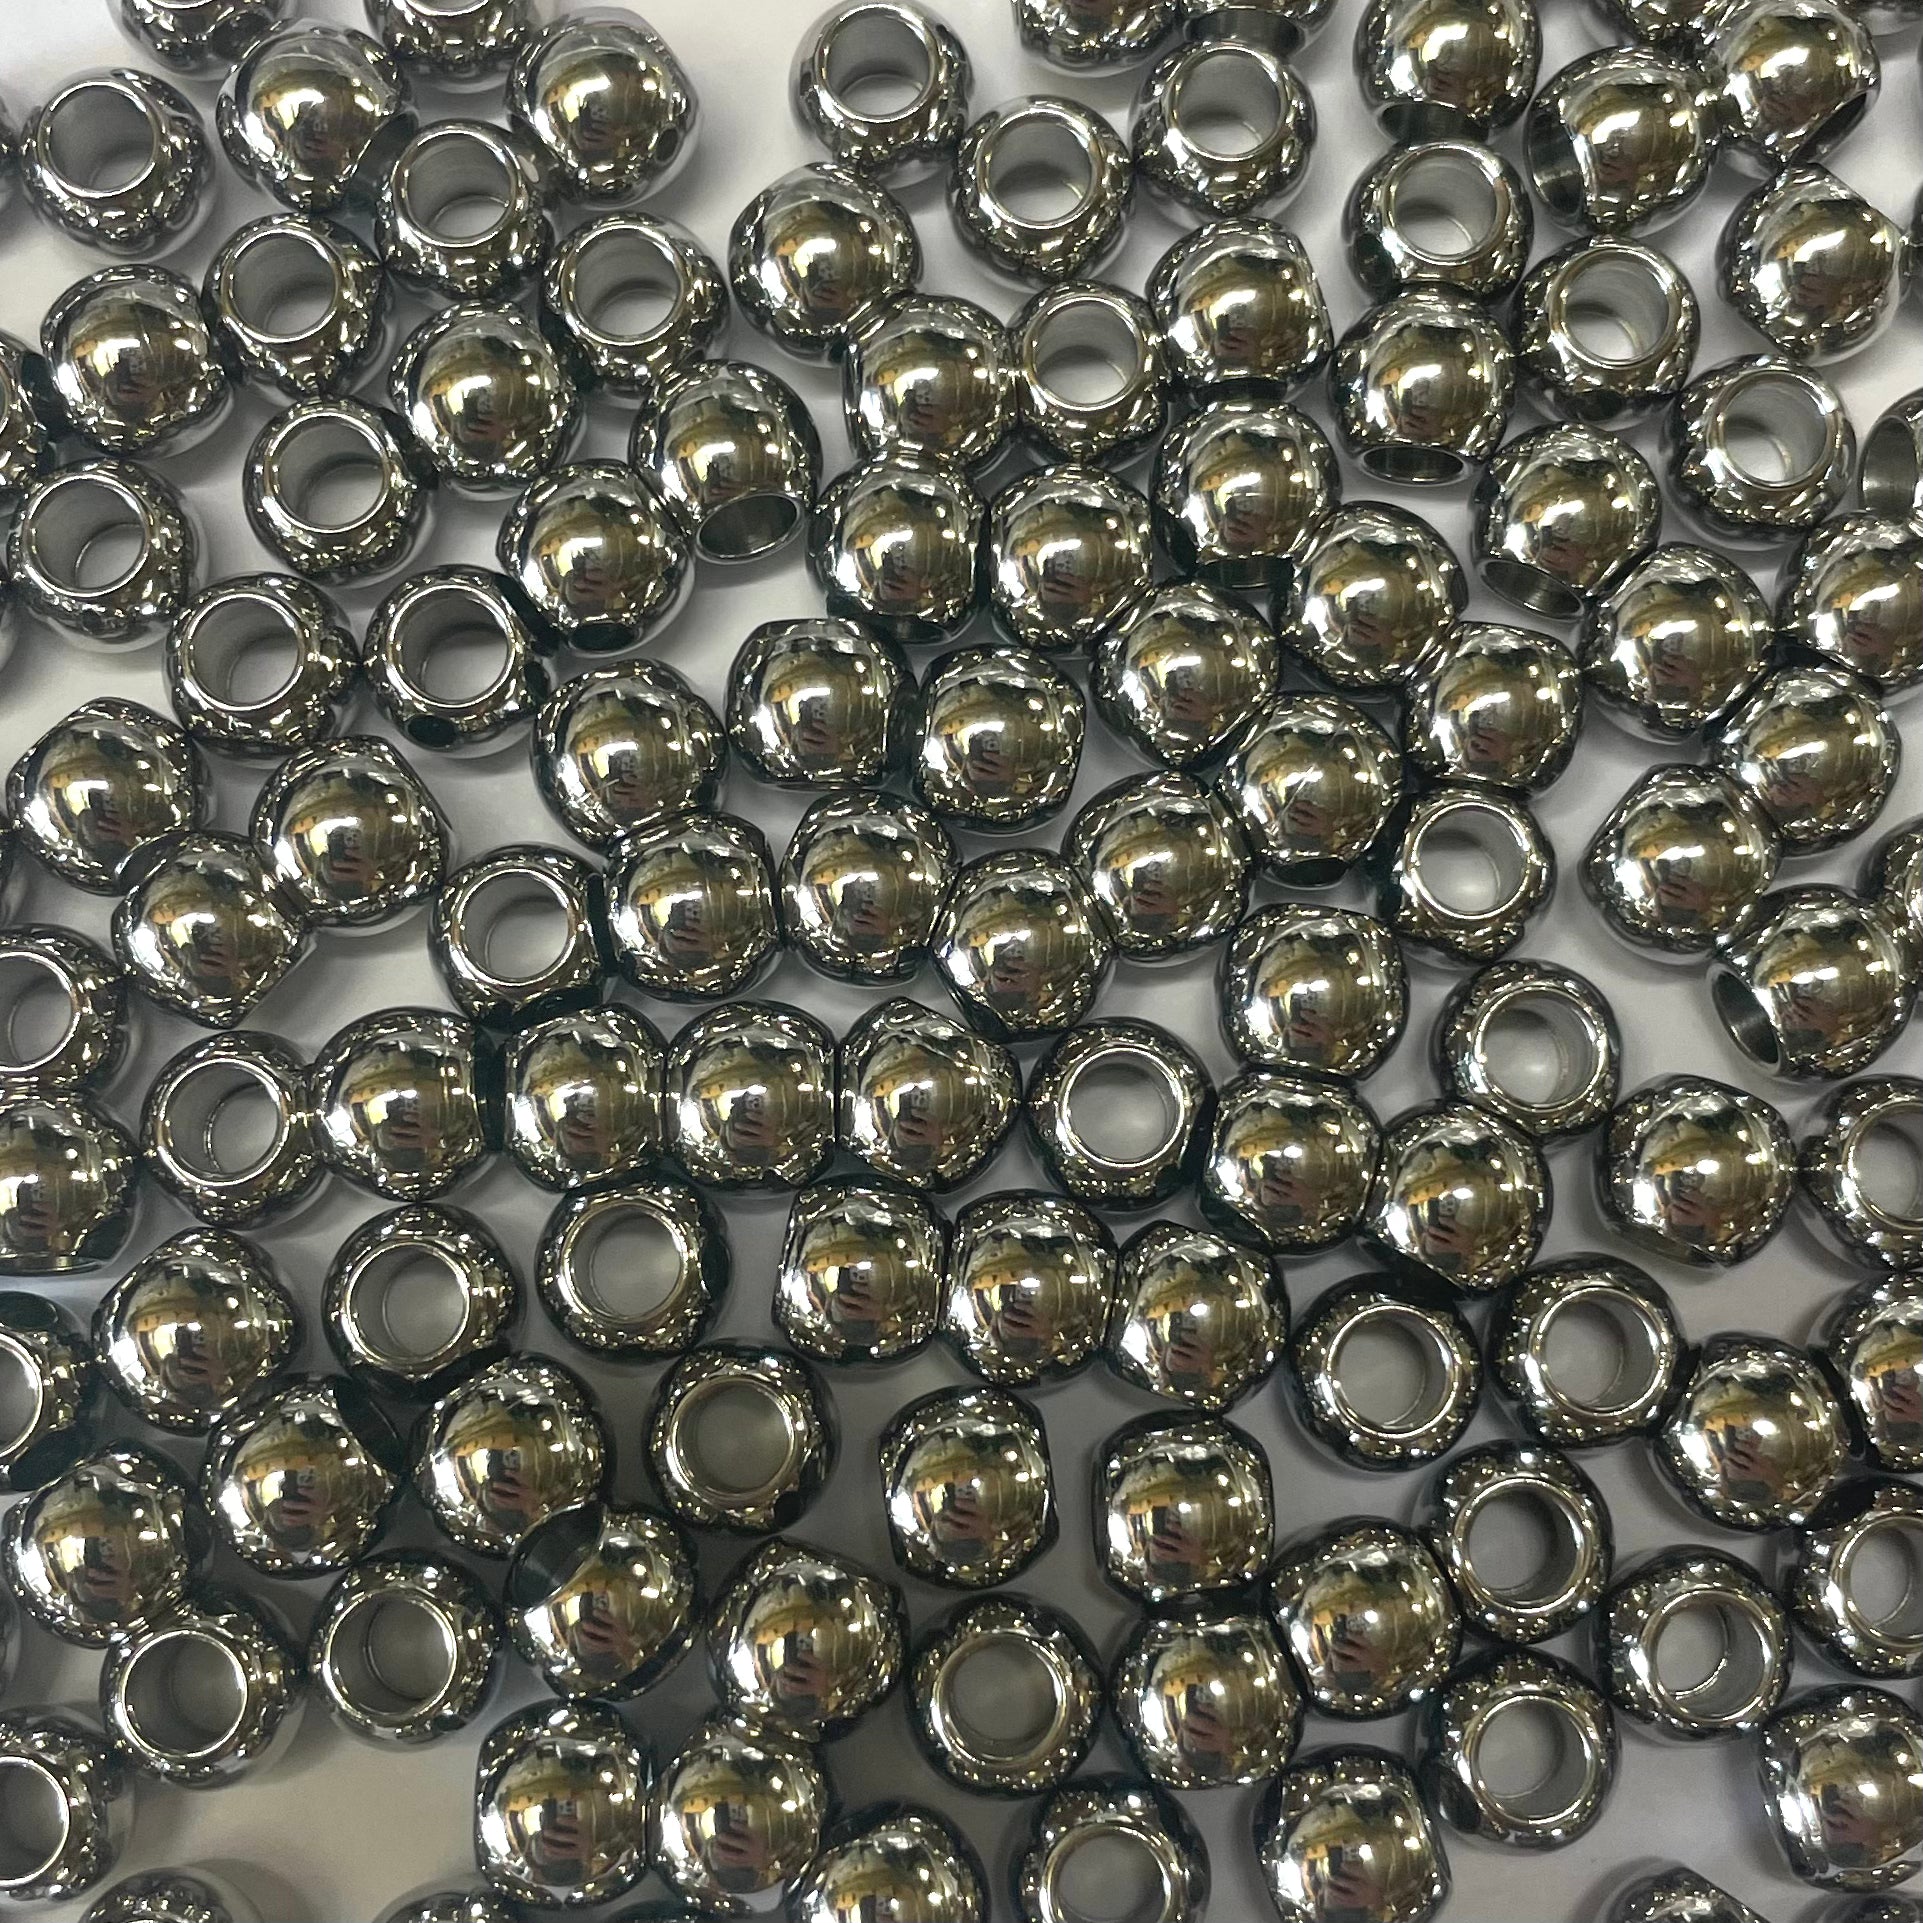 Stainless Steel Beads 8mm x 10 pcs - Crome